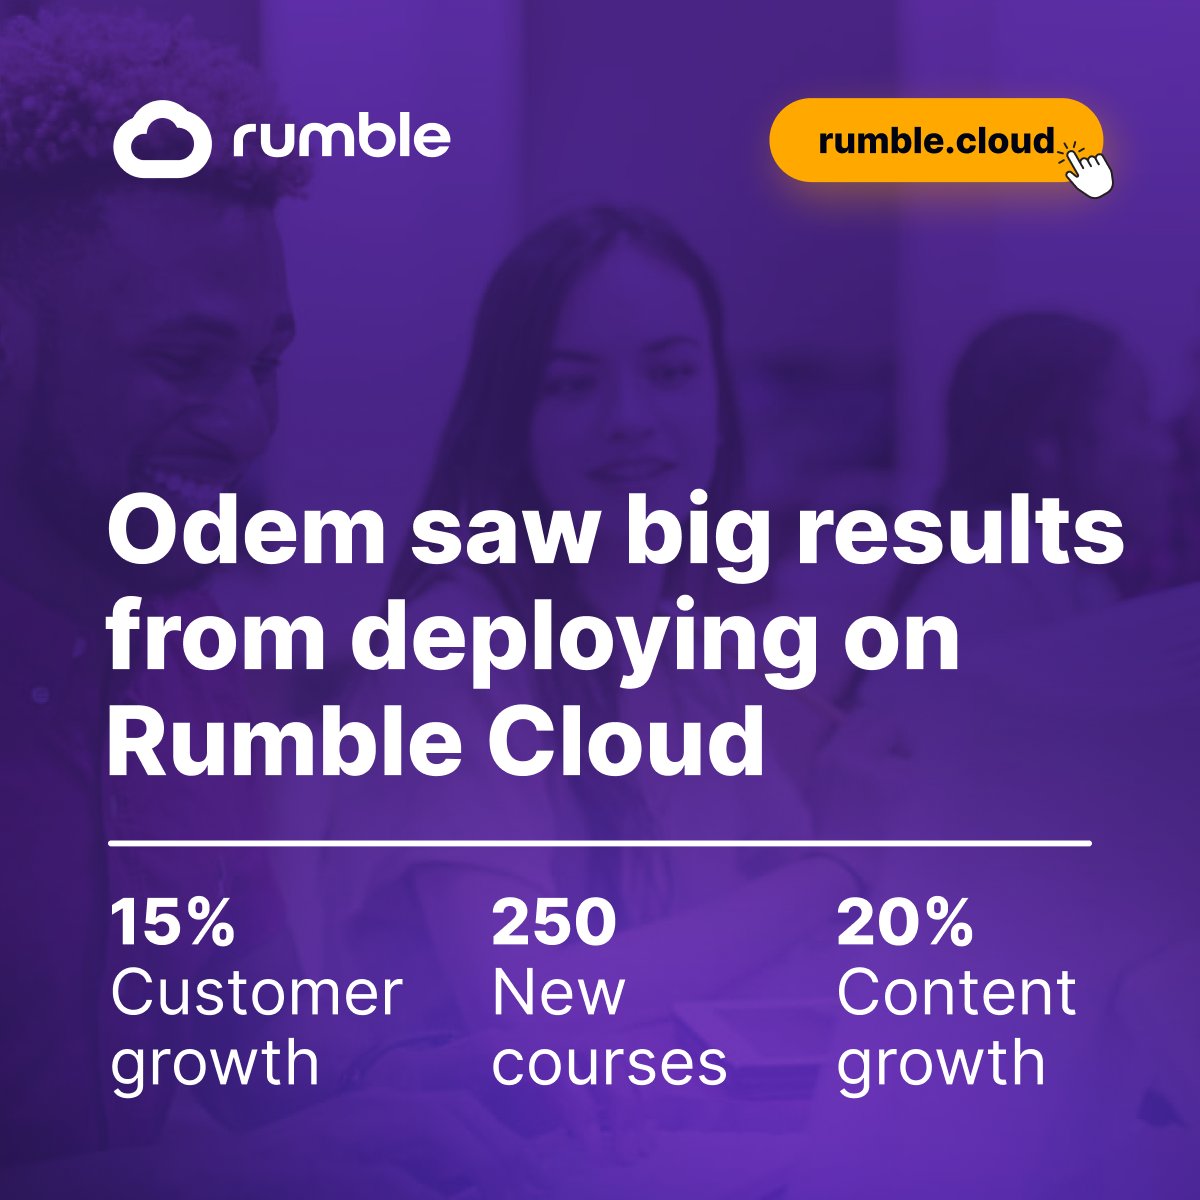 On demand education platform Odem safeguards academic freedom with Rumble Cloud. Read all about it rumble.cloud/resources/blog…  #RumbleTakeover  #maketheswitch  cc: @ODEM_Rich